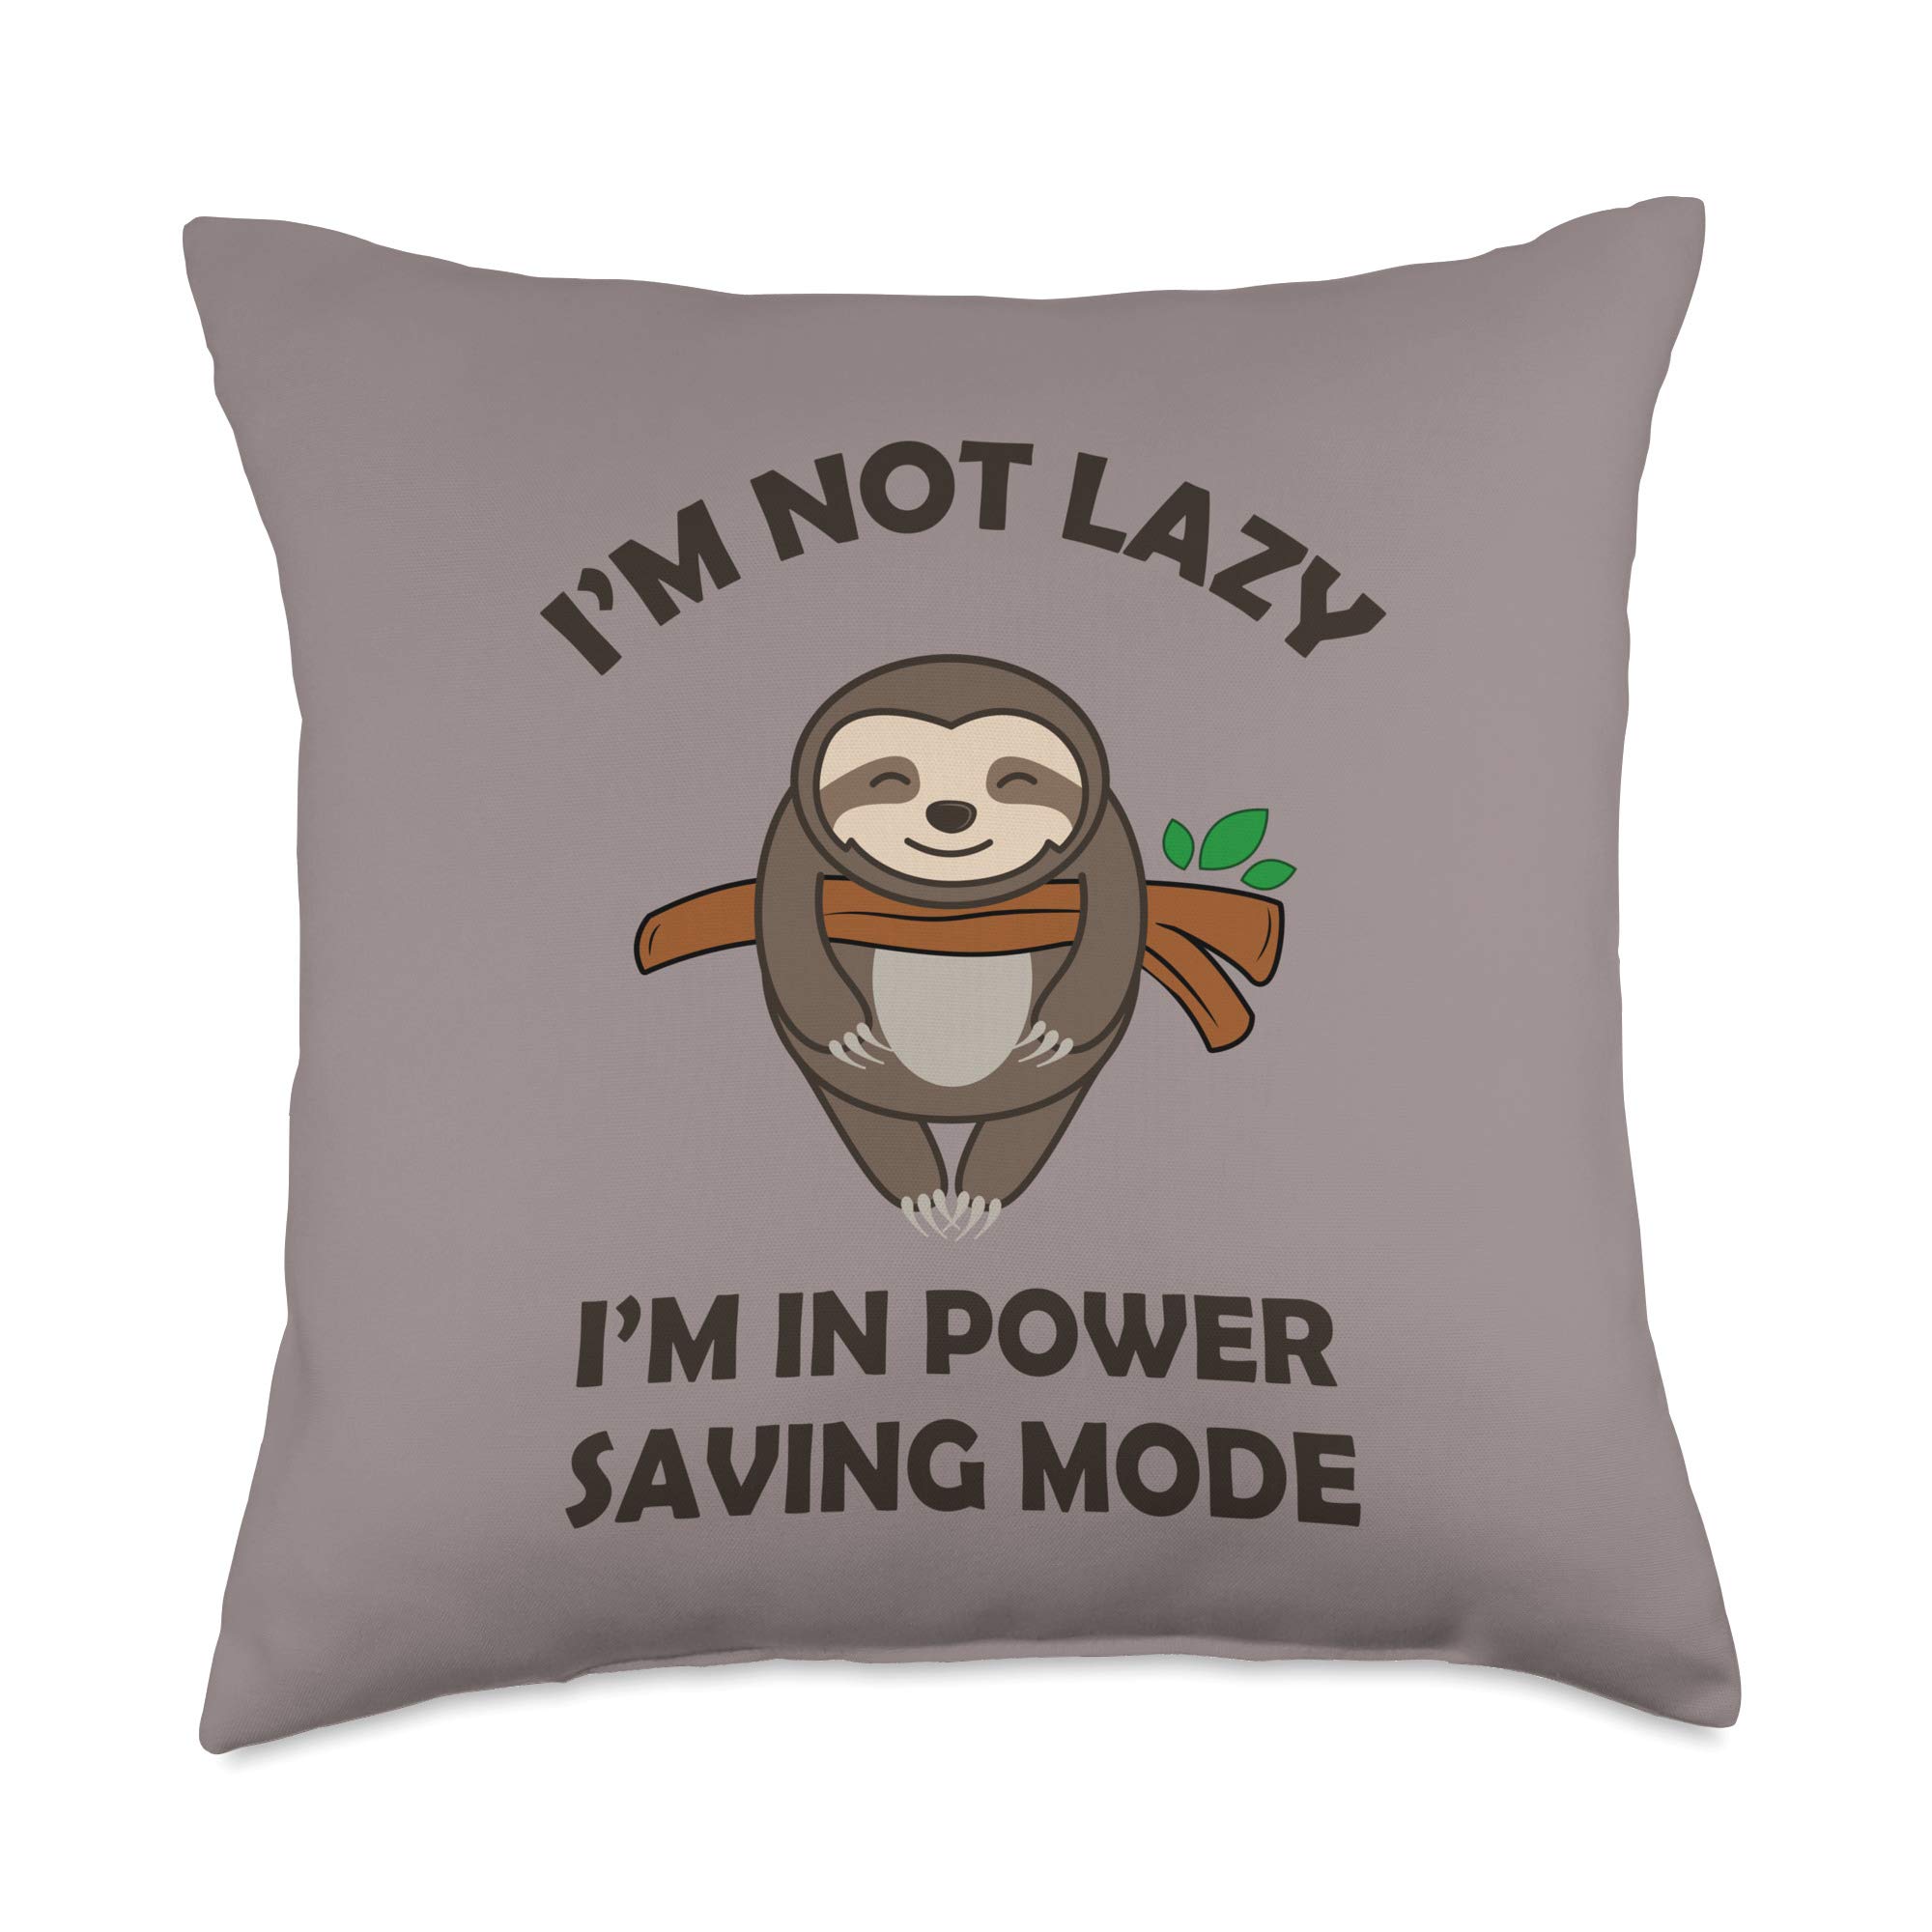 Funny Sloth Pillow I'M NOT LAZY Gift Throw Pillow, 18x18, Multicolor